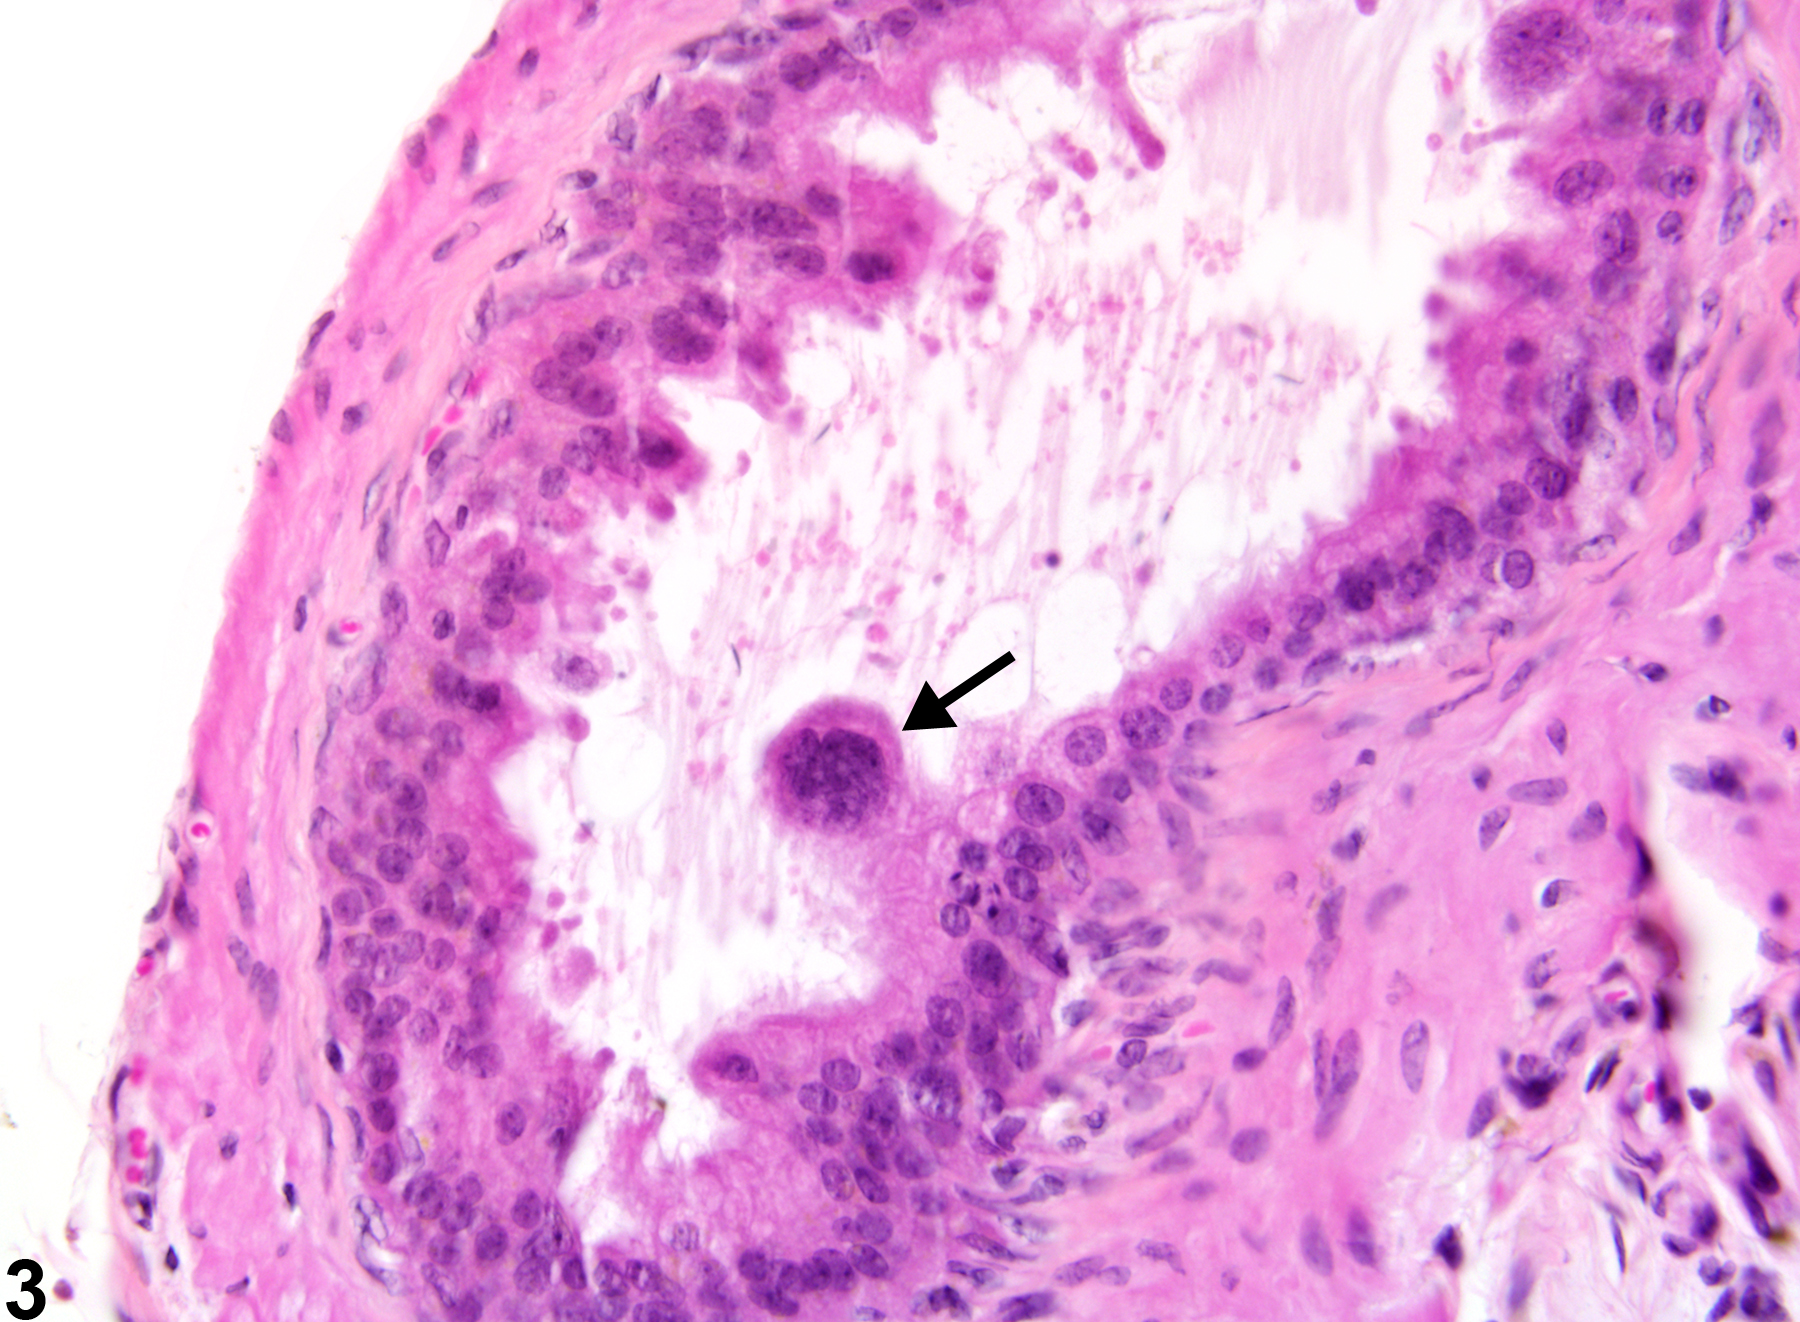 Image of epithelial karyomegaly in the epididymis from a male B6C3F1 mouse in a chronic study